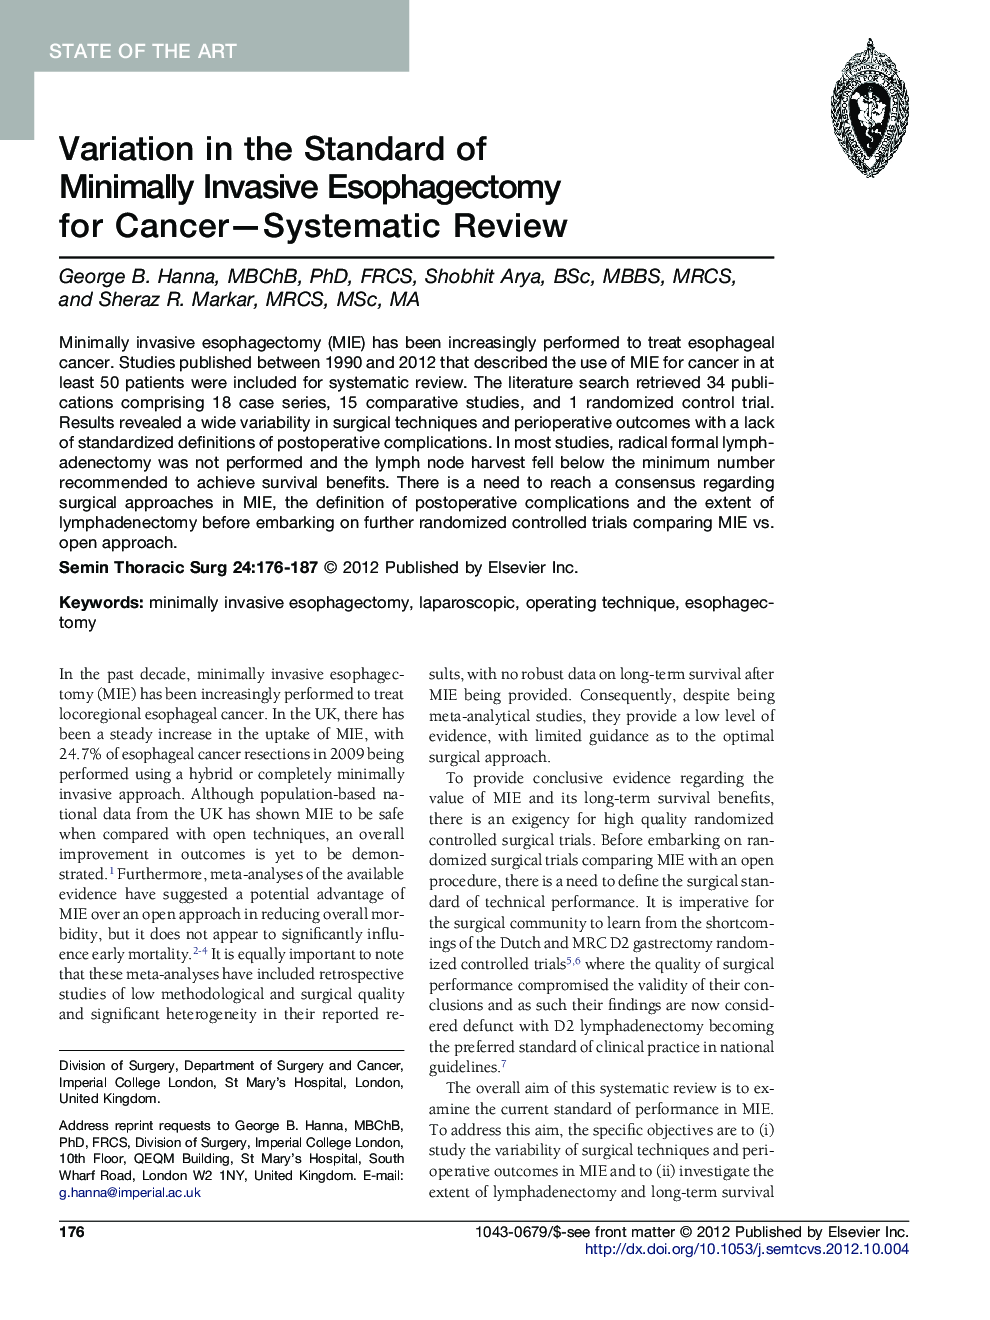 Variation in the Standard of Minimally Invasive Esophagectomy for Cancer—Systematic Review